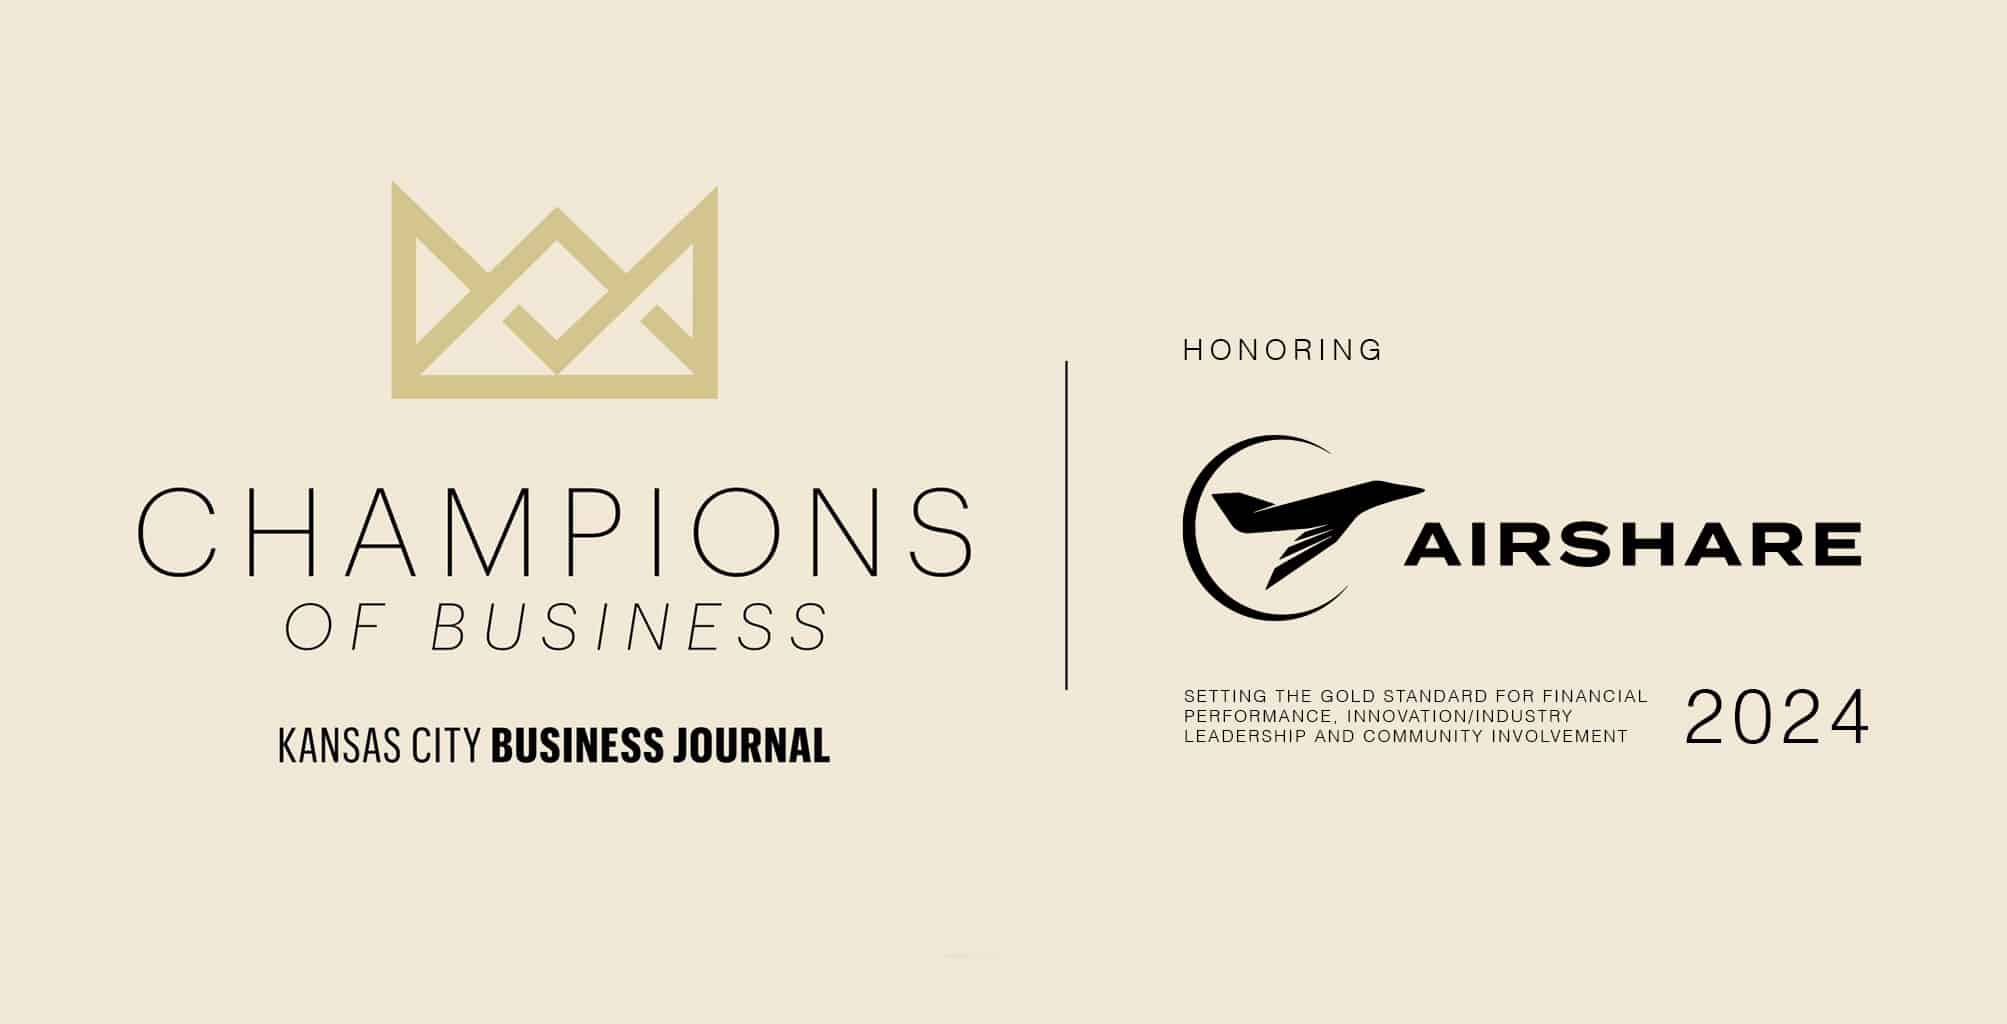 Airshare is honored to be selected as one of Kansas City Business Journal's Champions of Business